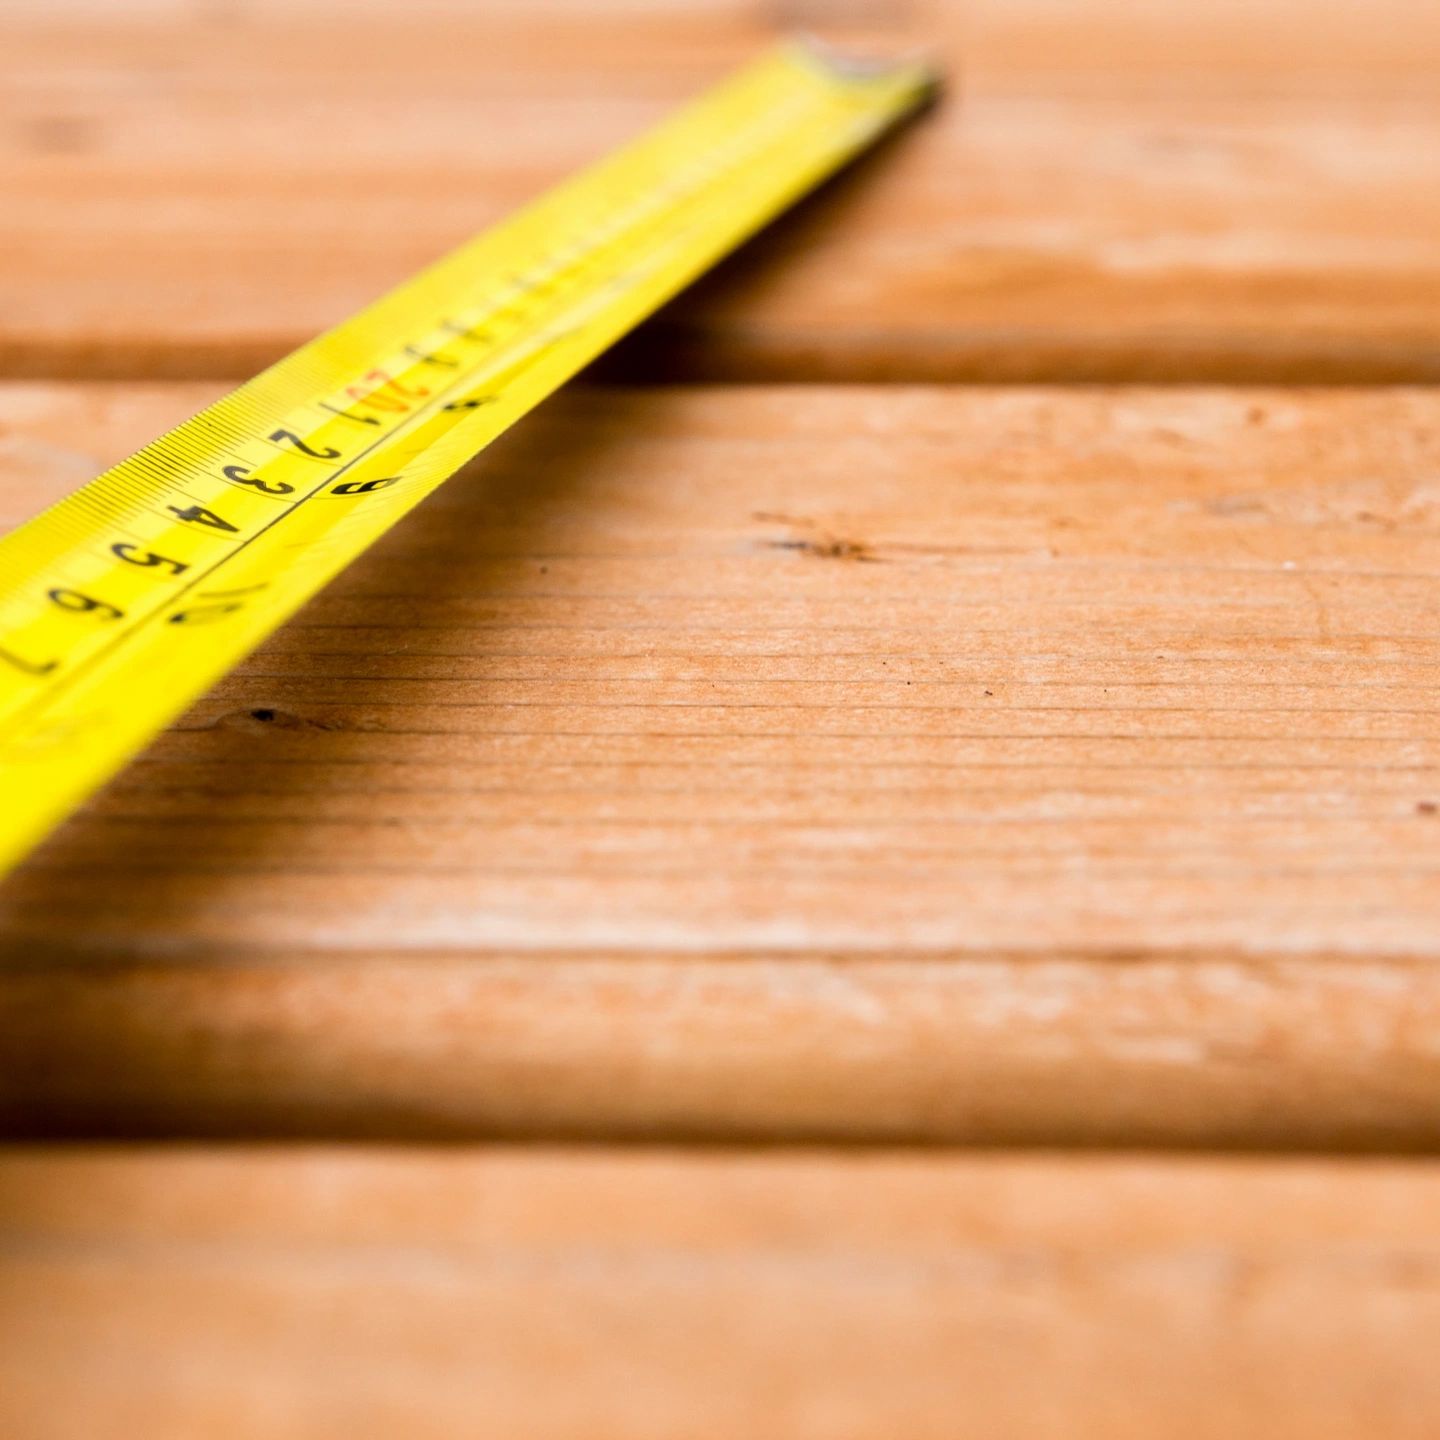 a Tape measure on a wooden table